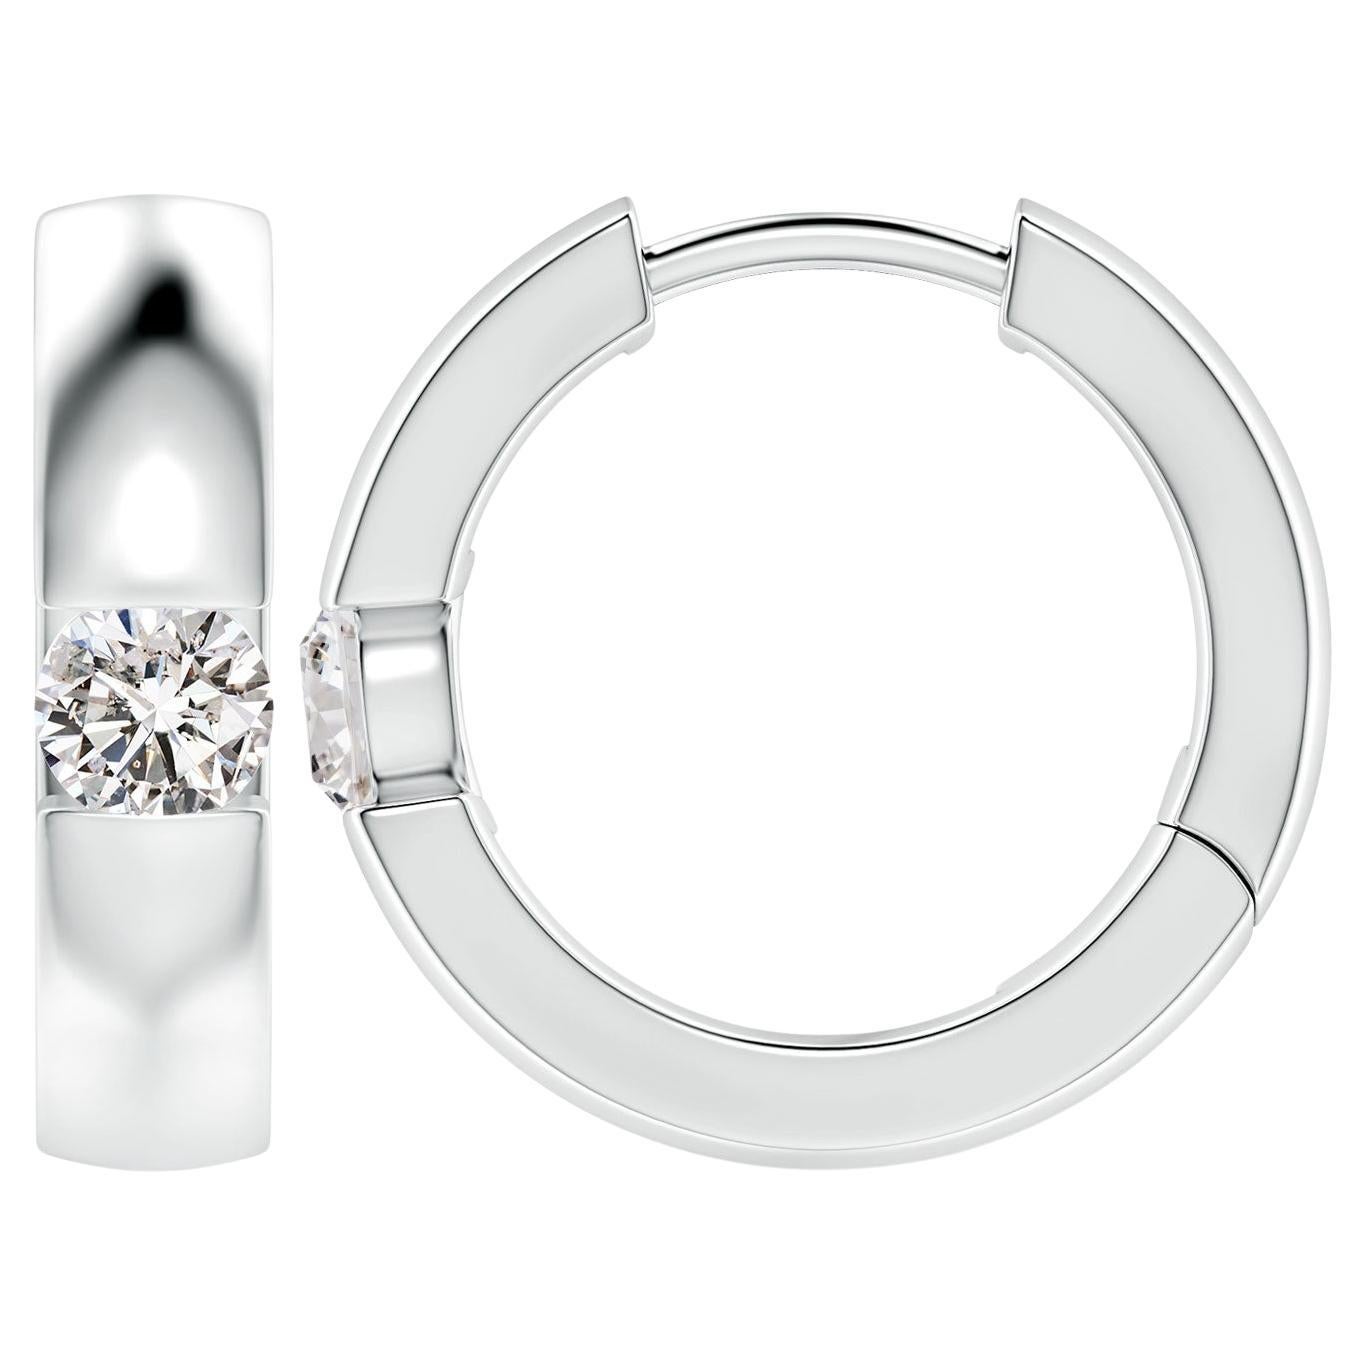 Natural Round 0.35ct Diamond Hoop Earrings in 14K White Gold (Color-I-J)